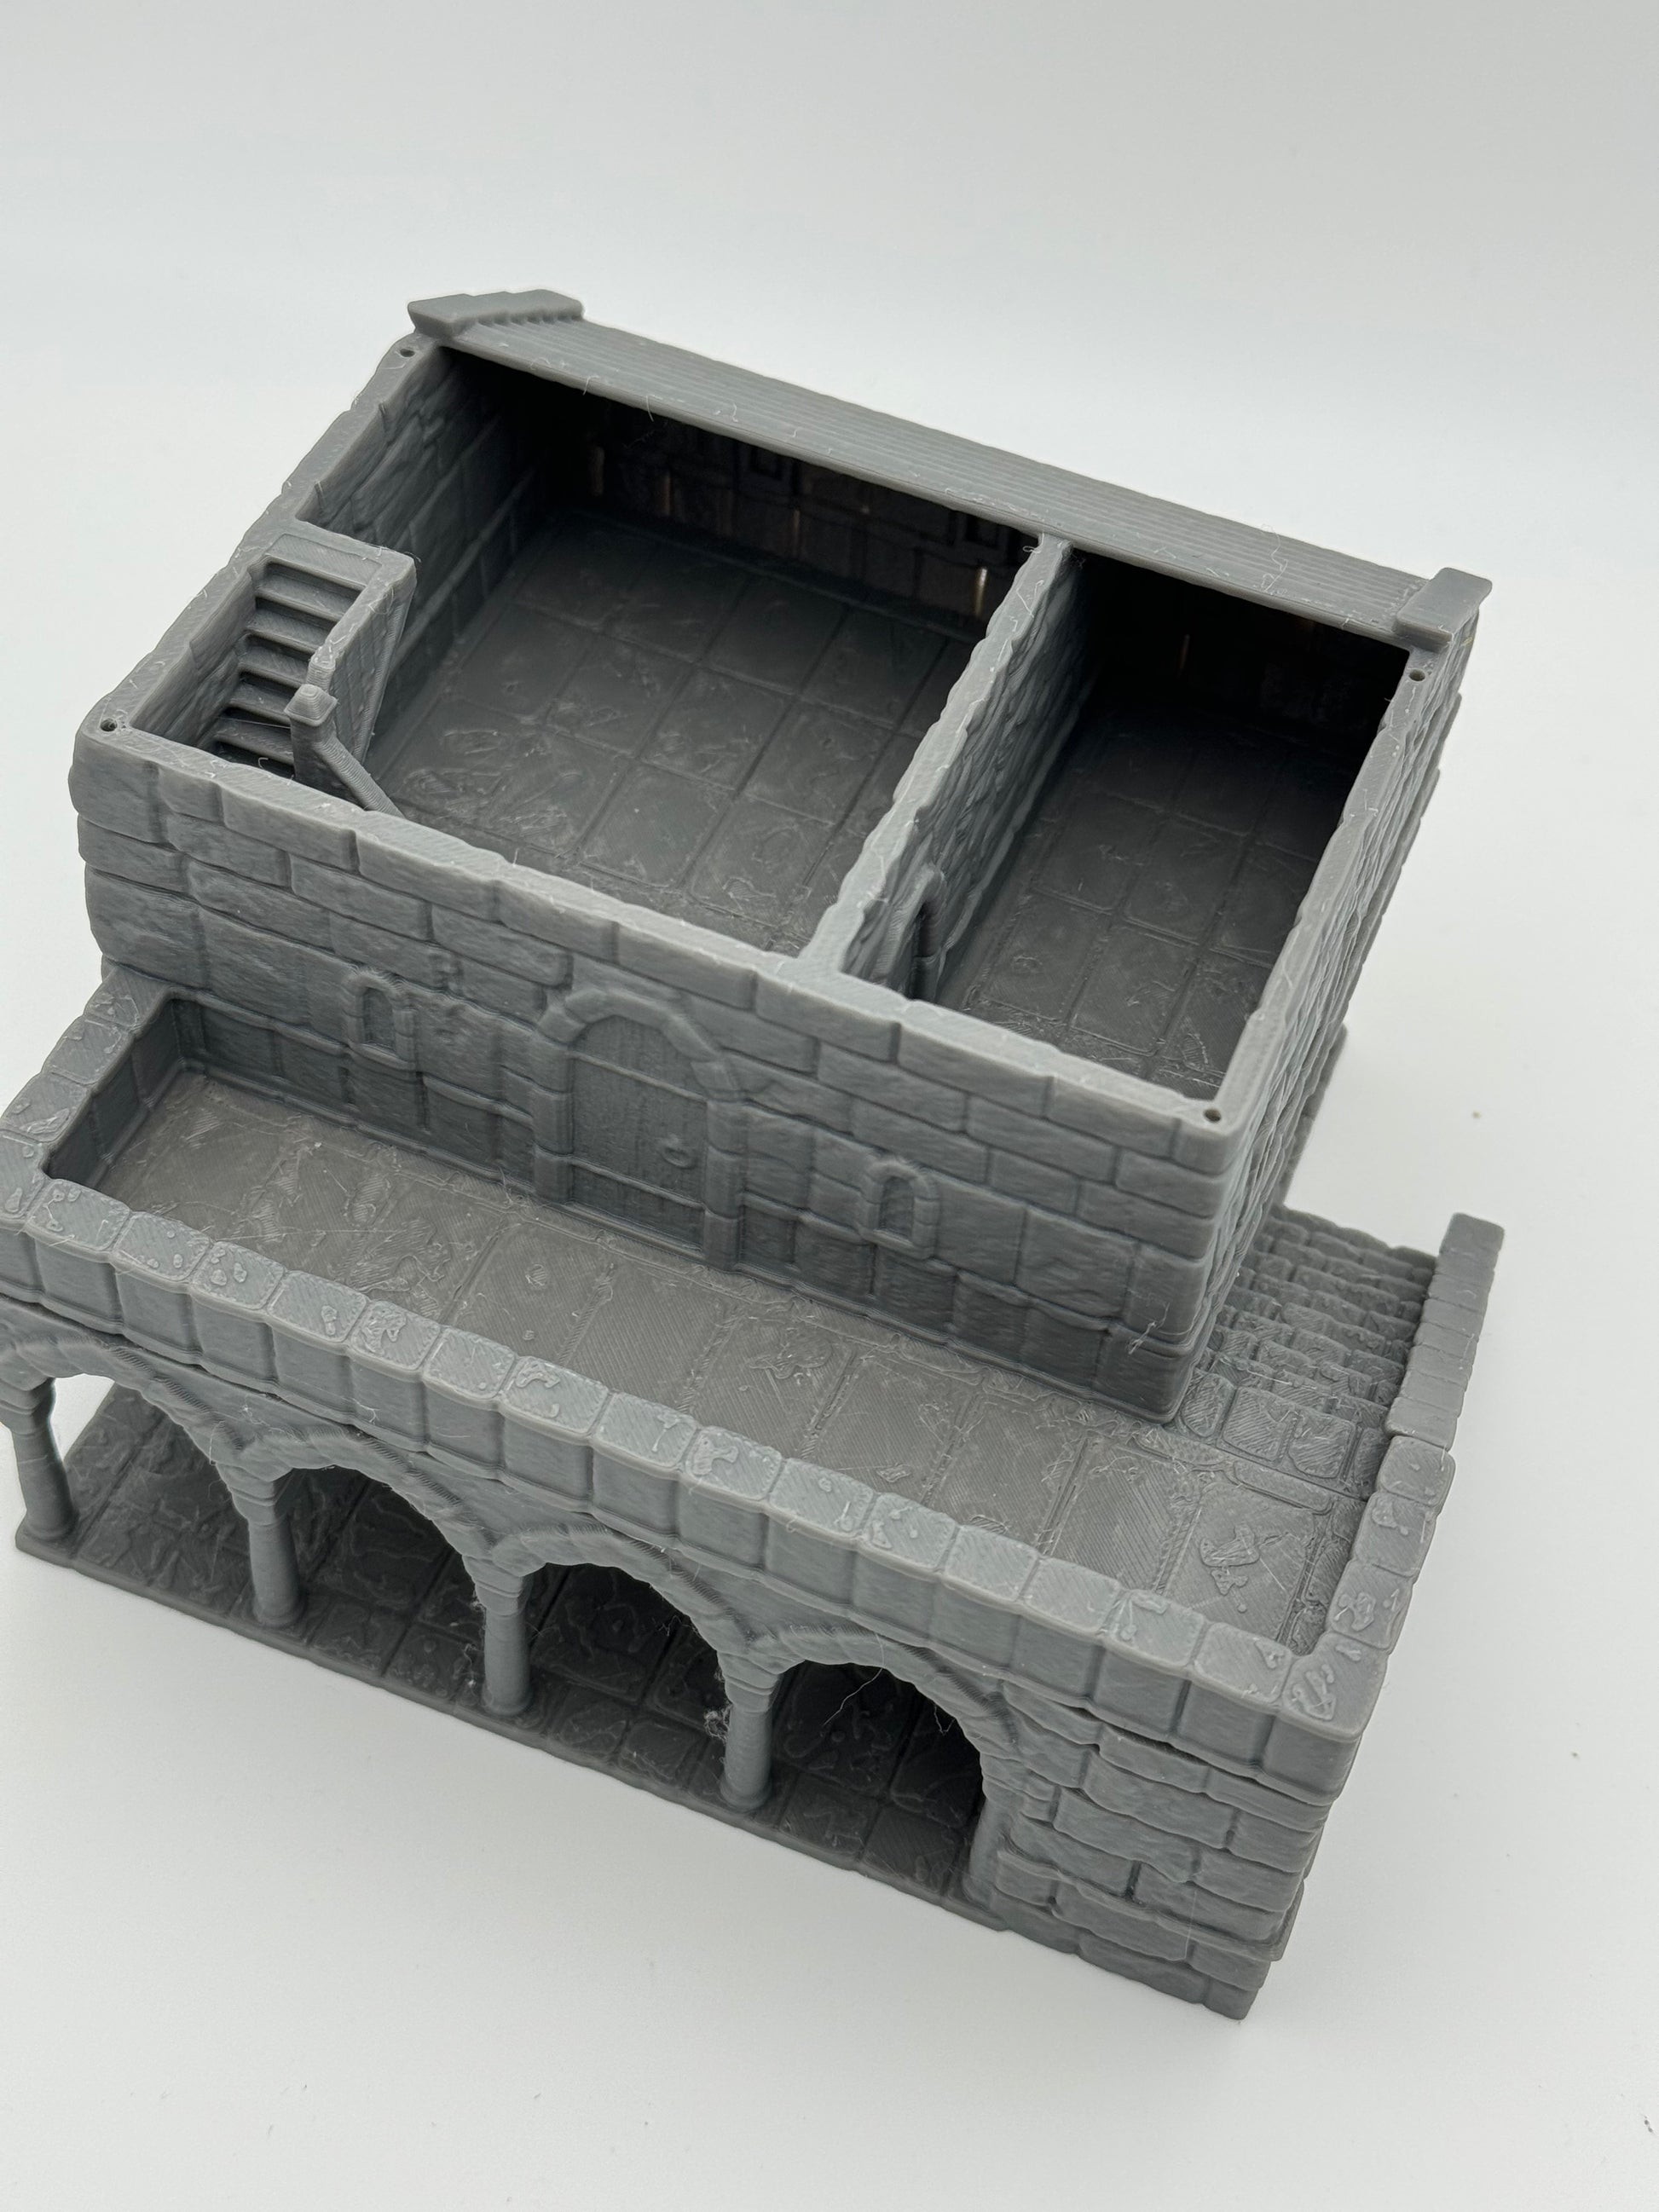 Produktfoto Tabletop 28mm The Printing Goes Ever On (TPGEO)  0: Haus B Ivory City - Gebäude Königreich Gonthan -  Tabletop Terrain